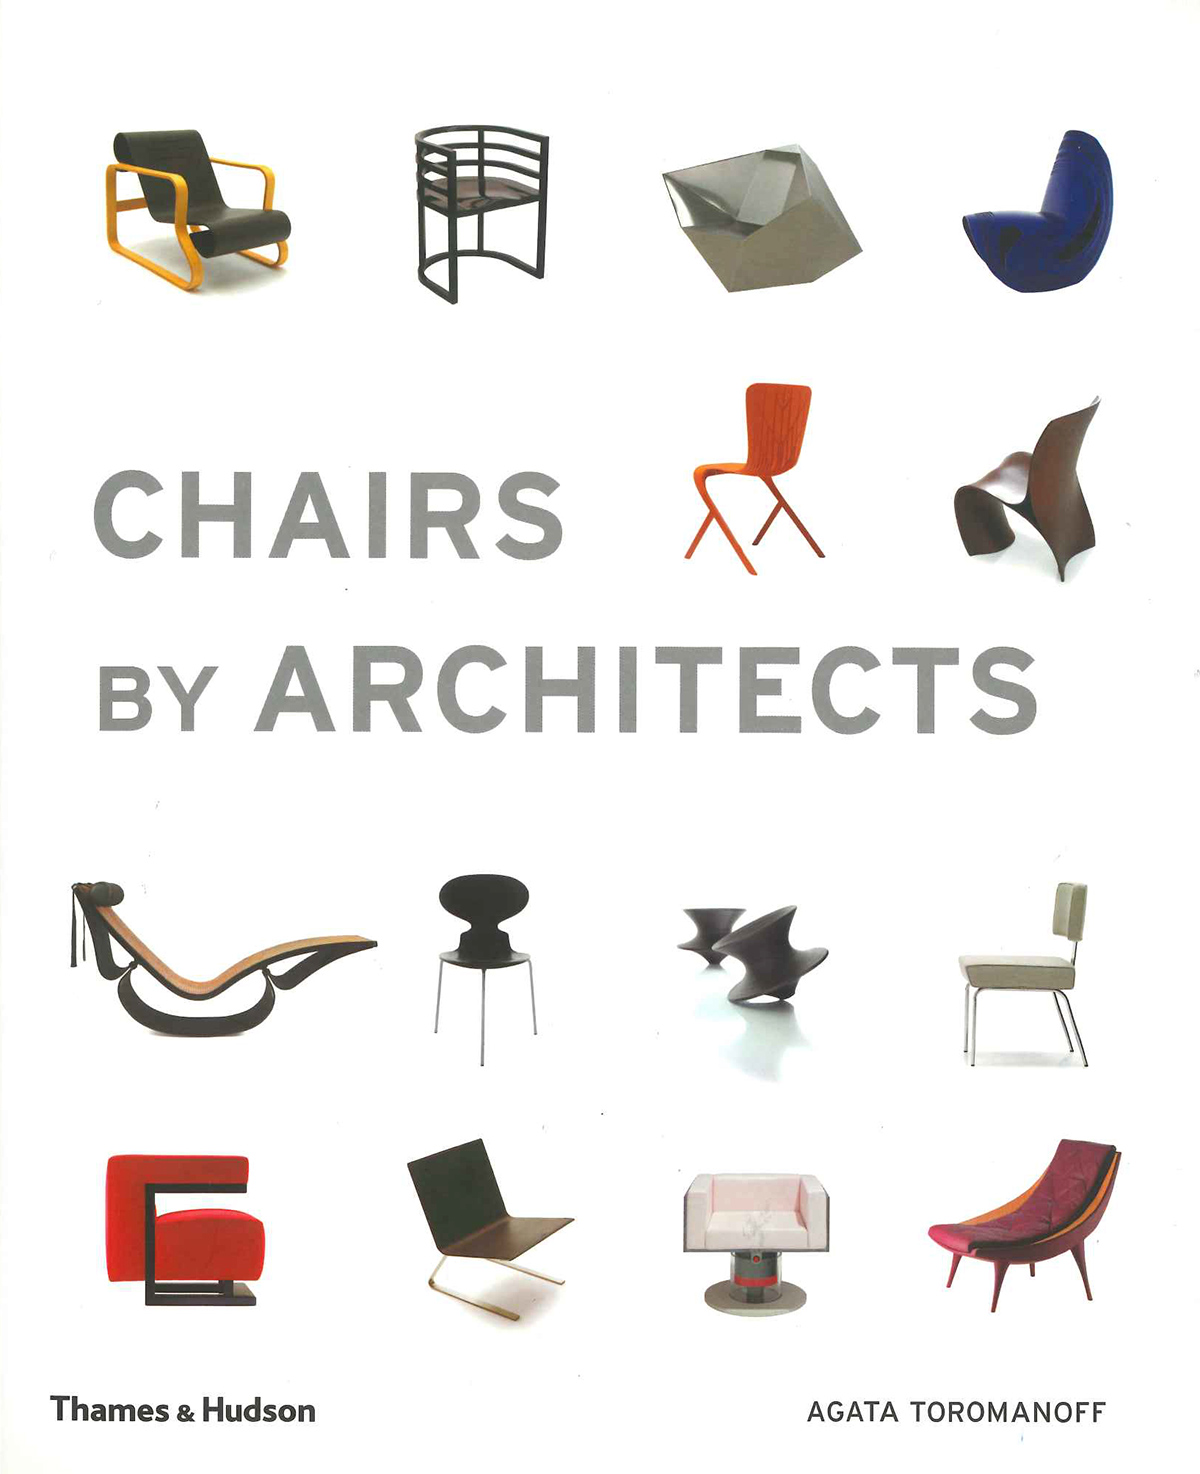 Titanium: Chairs by Architects, book cover